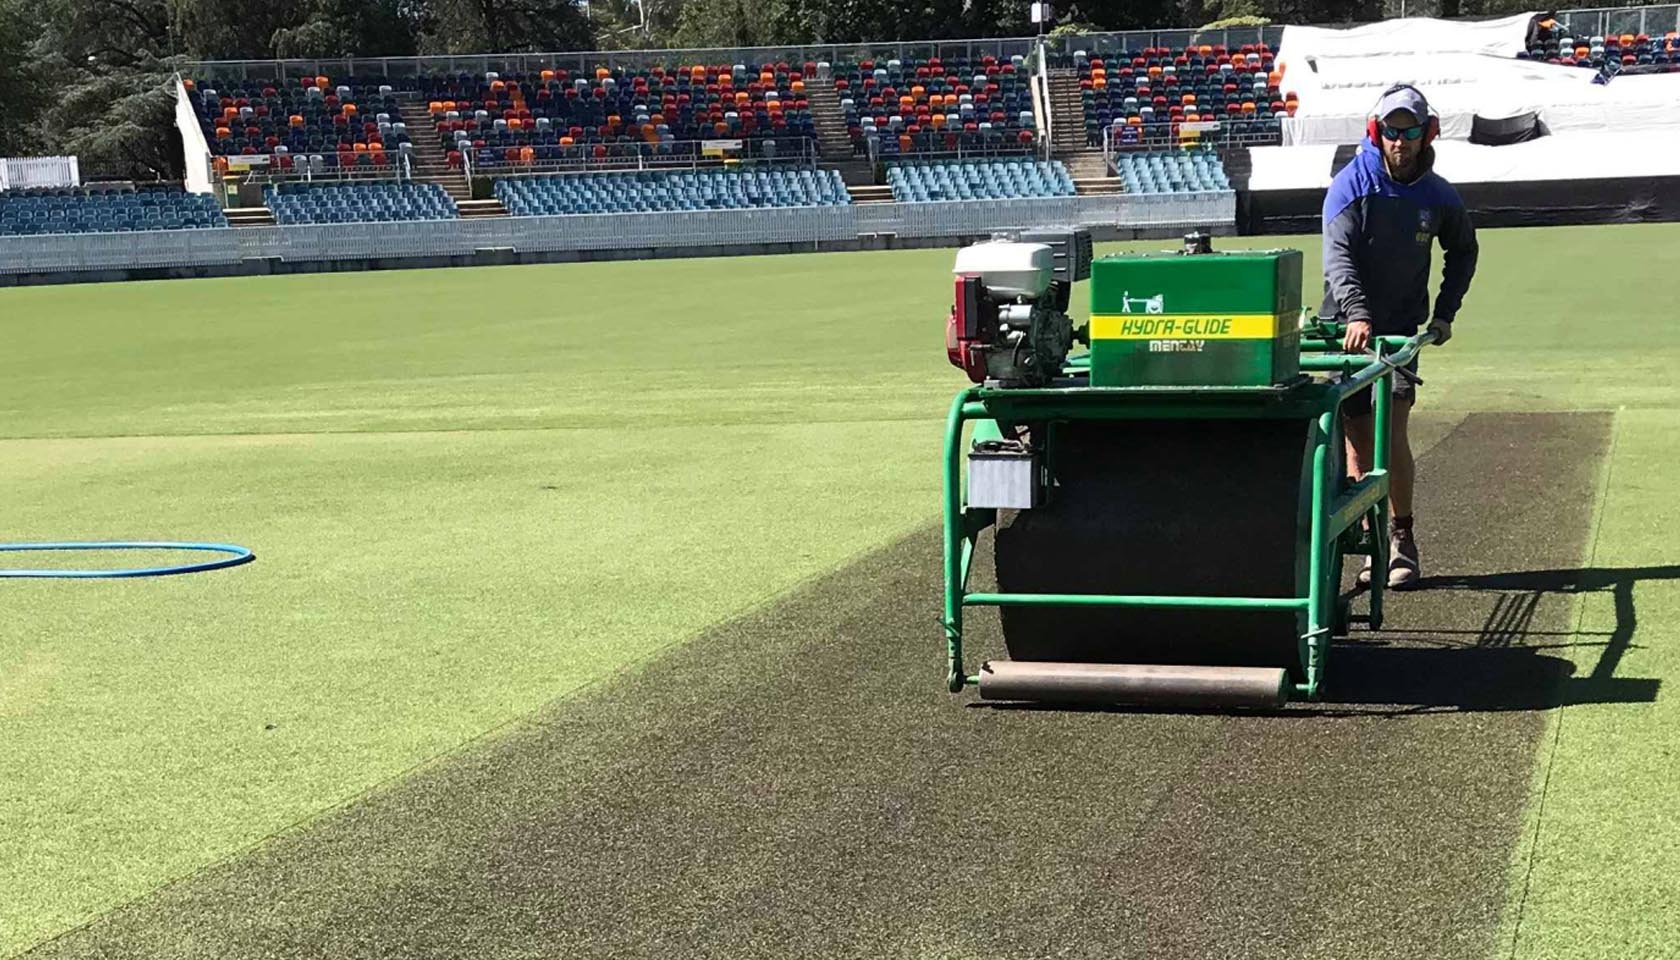 maintenance of the pitch